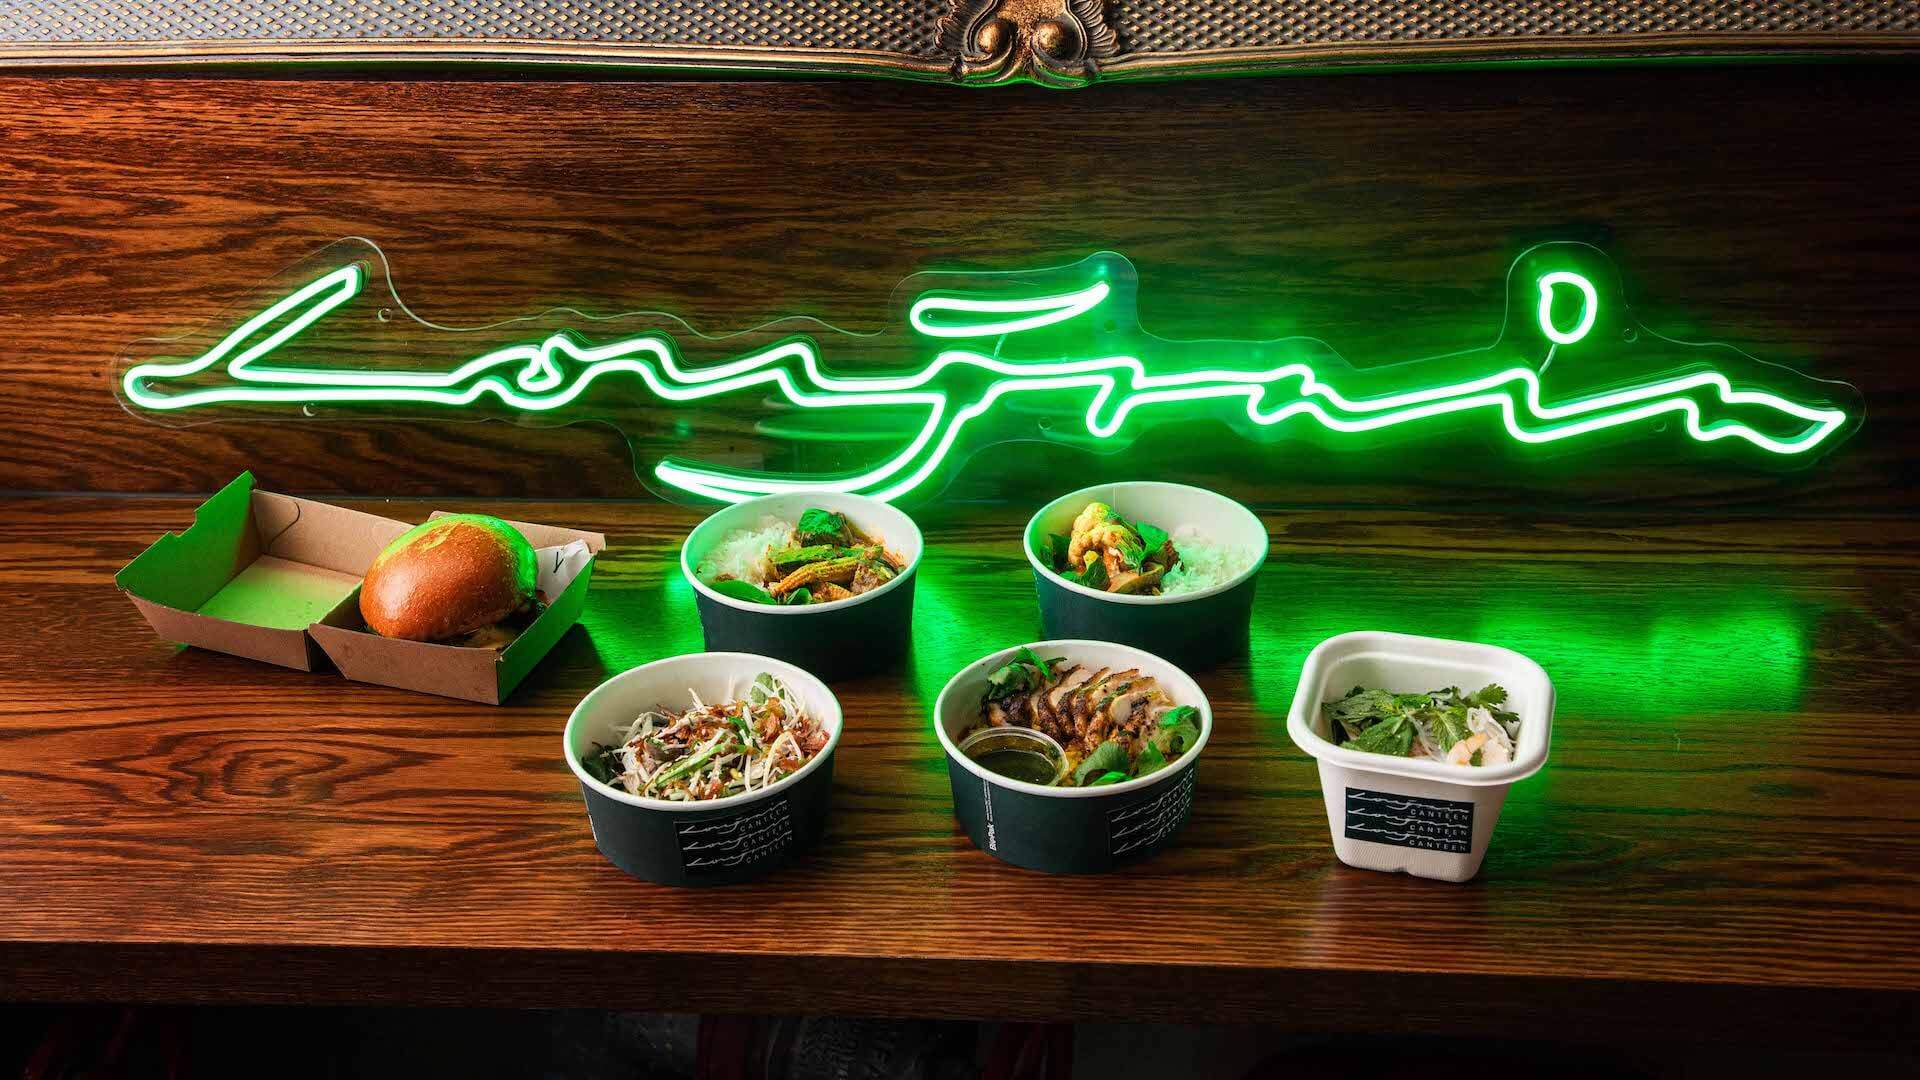 Coming Soon: Thai Dining Institution Longrain Is Opening a Pop-Up Lunch Spot in the CBD